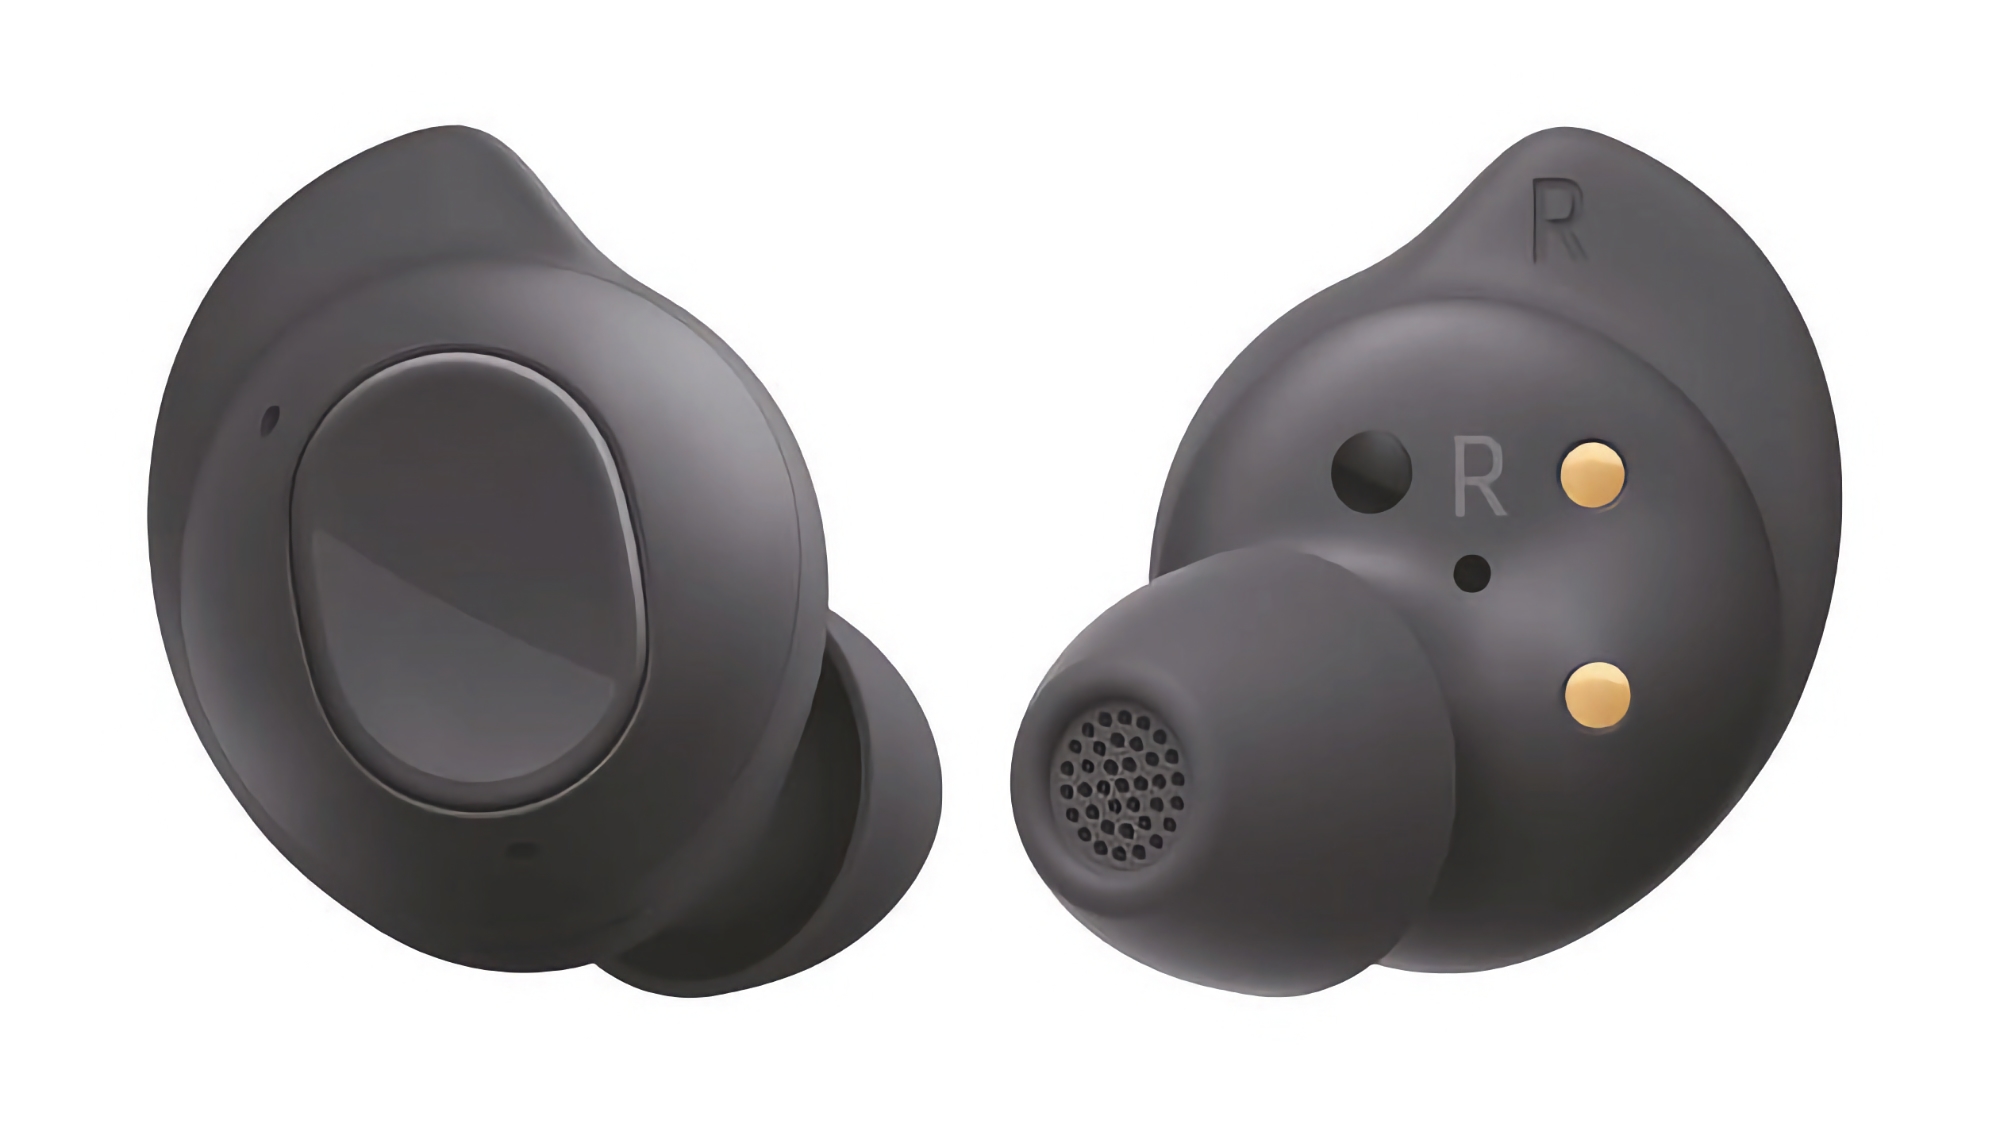 Insider: Samsung Galaxy Buds FE will get 12mm AKG speakers and cost $99